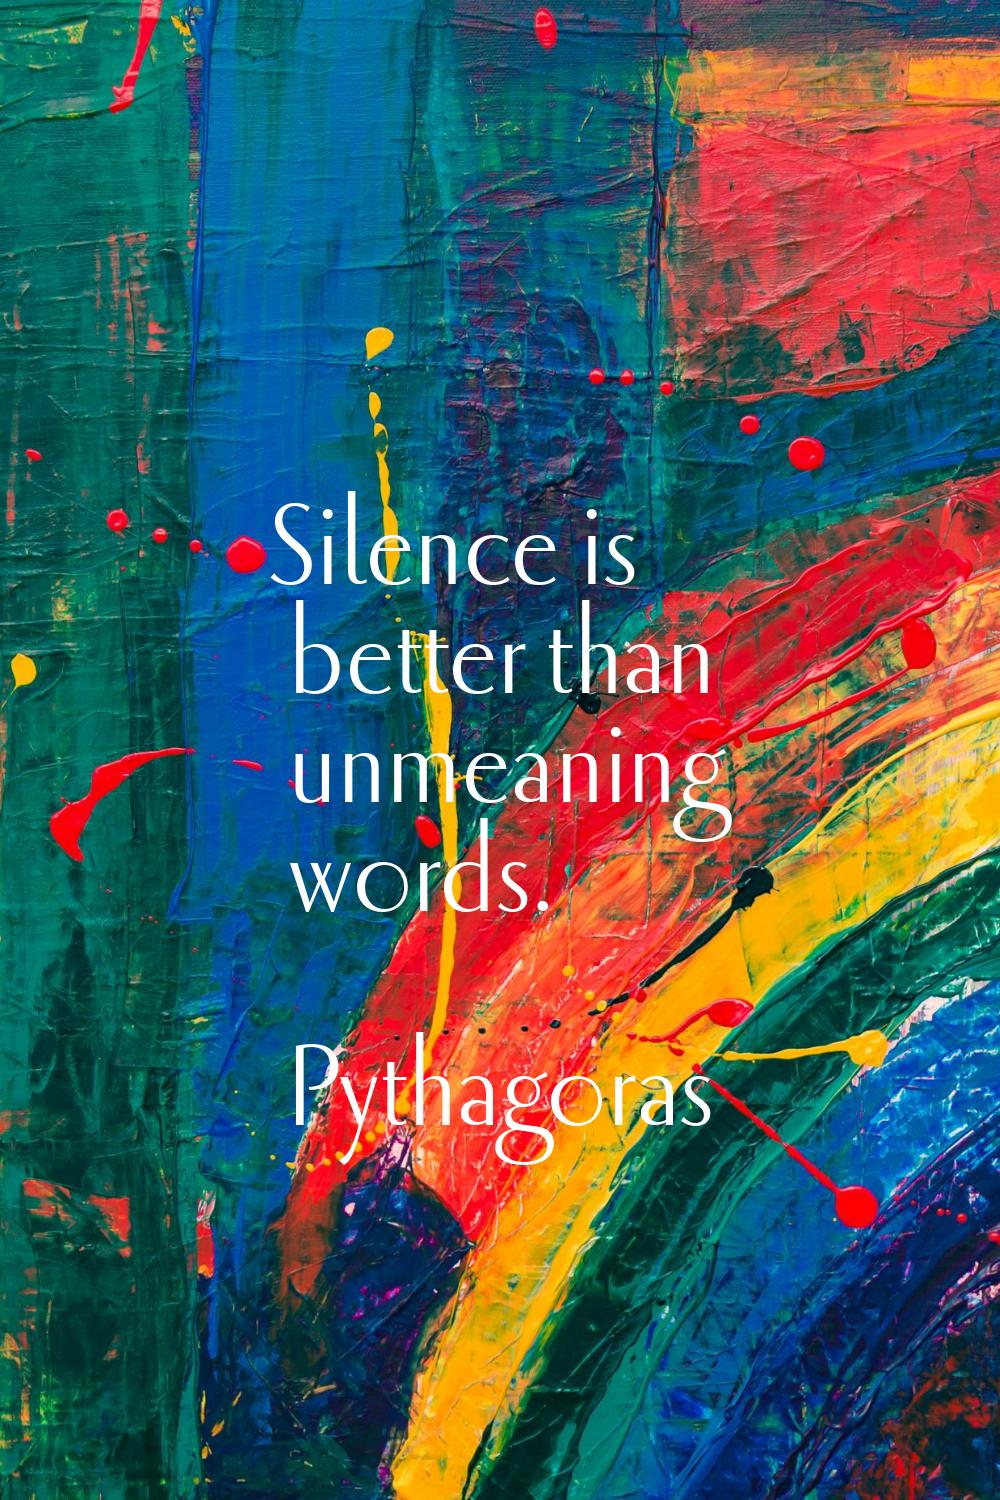 Silence is better than unmeaning words.